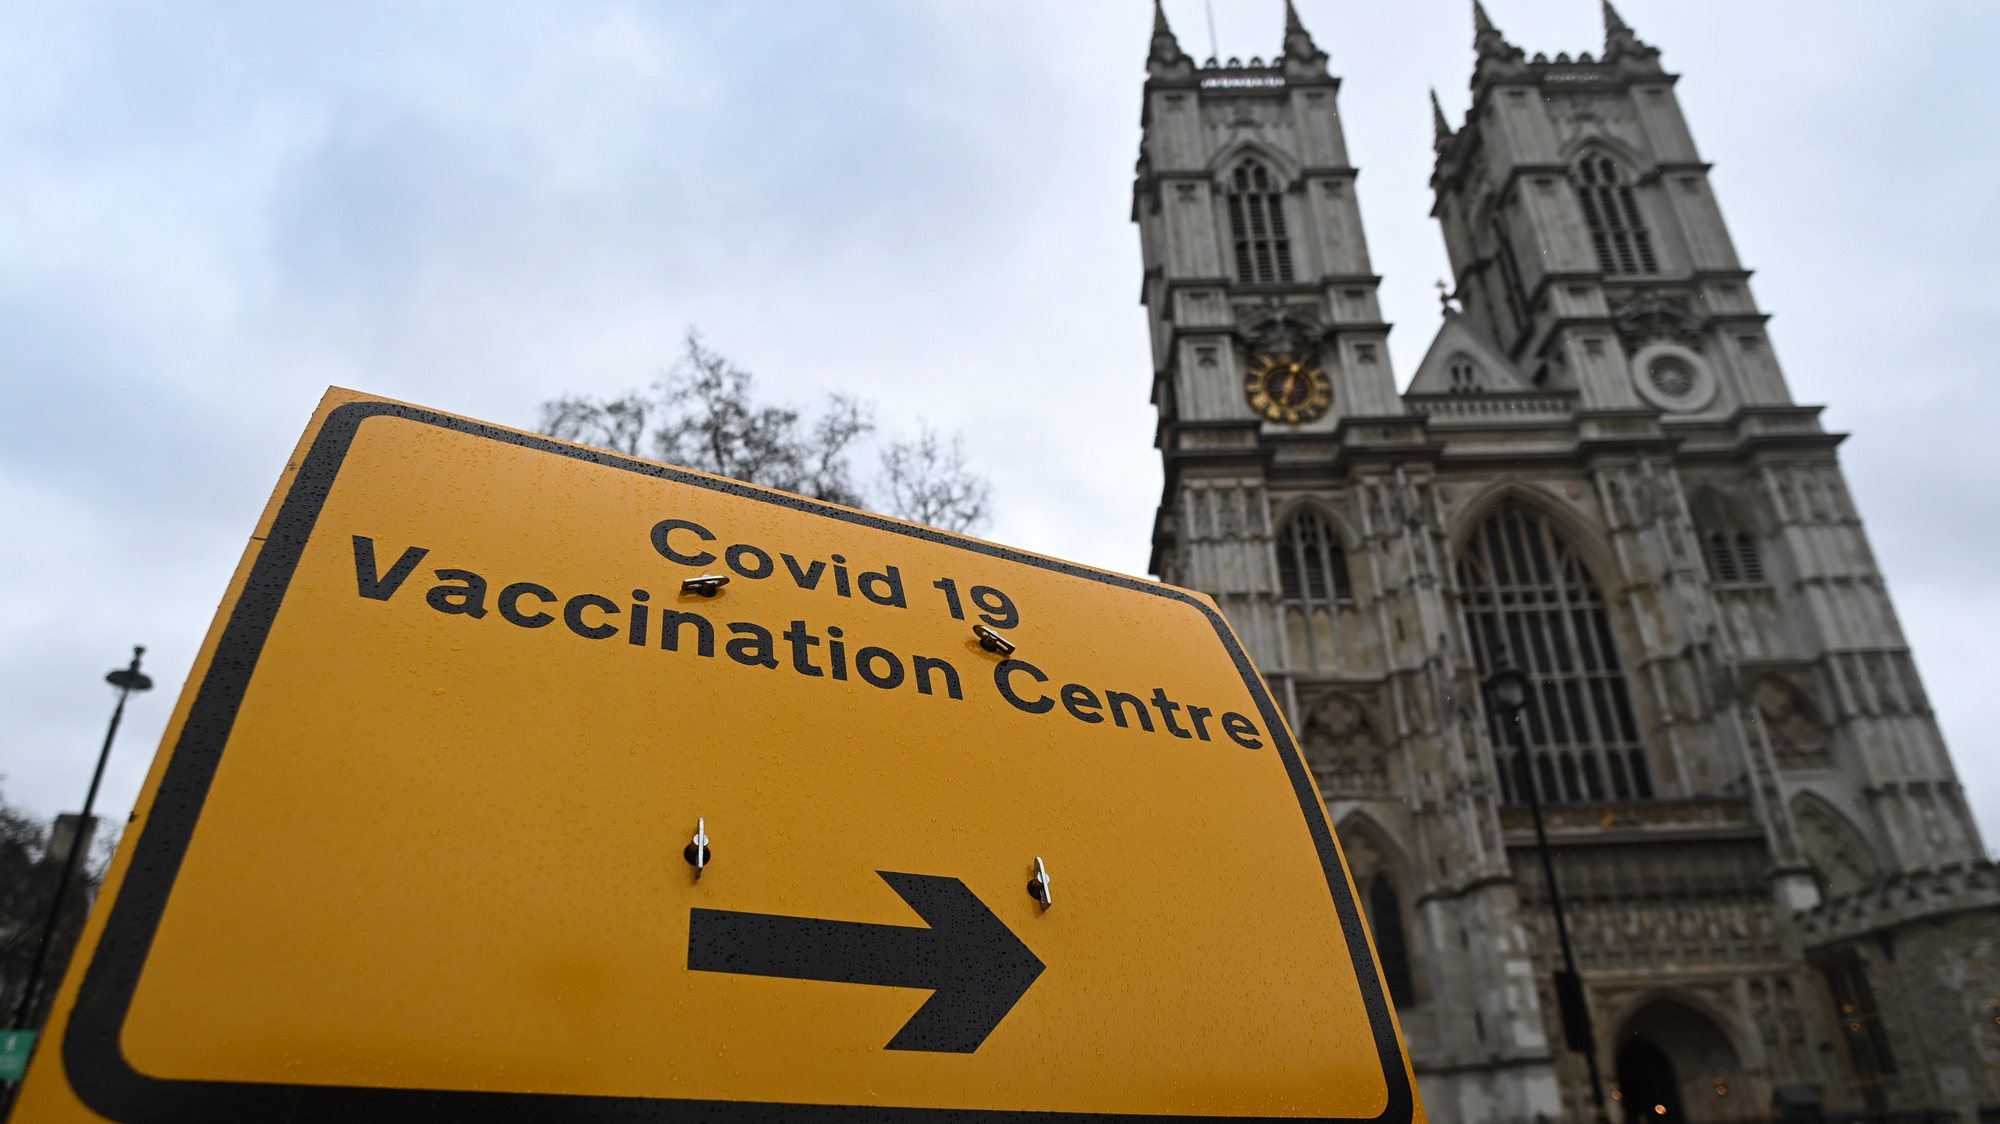 epa09065497 A Covid-19 vaccination centre sign outside Westminster Abbey in London, Britain, 10 March 2021. Westminster Abbey has opened its doors acting as a vaccination centre in London. More than twenty million people have already received their first dose of a Covid-19 vaccine in the UK.  EPA/ANDY RAIN